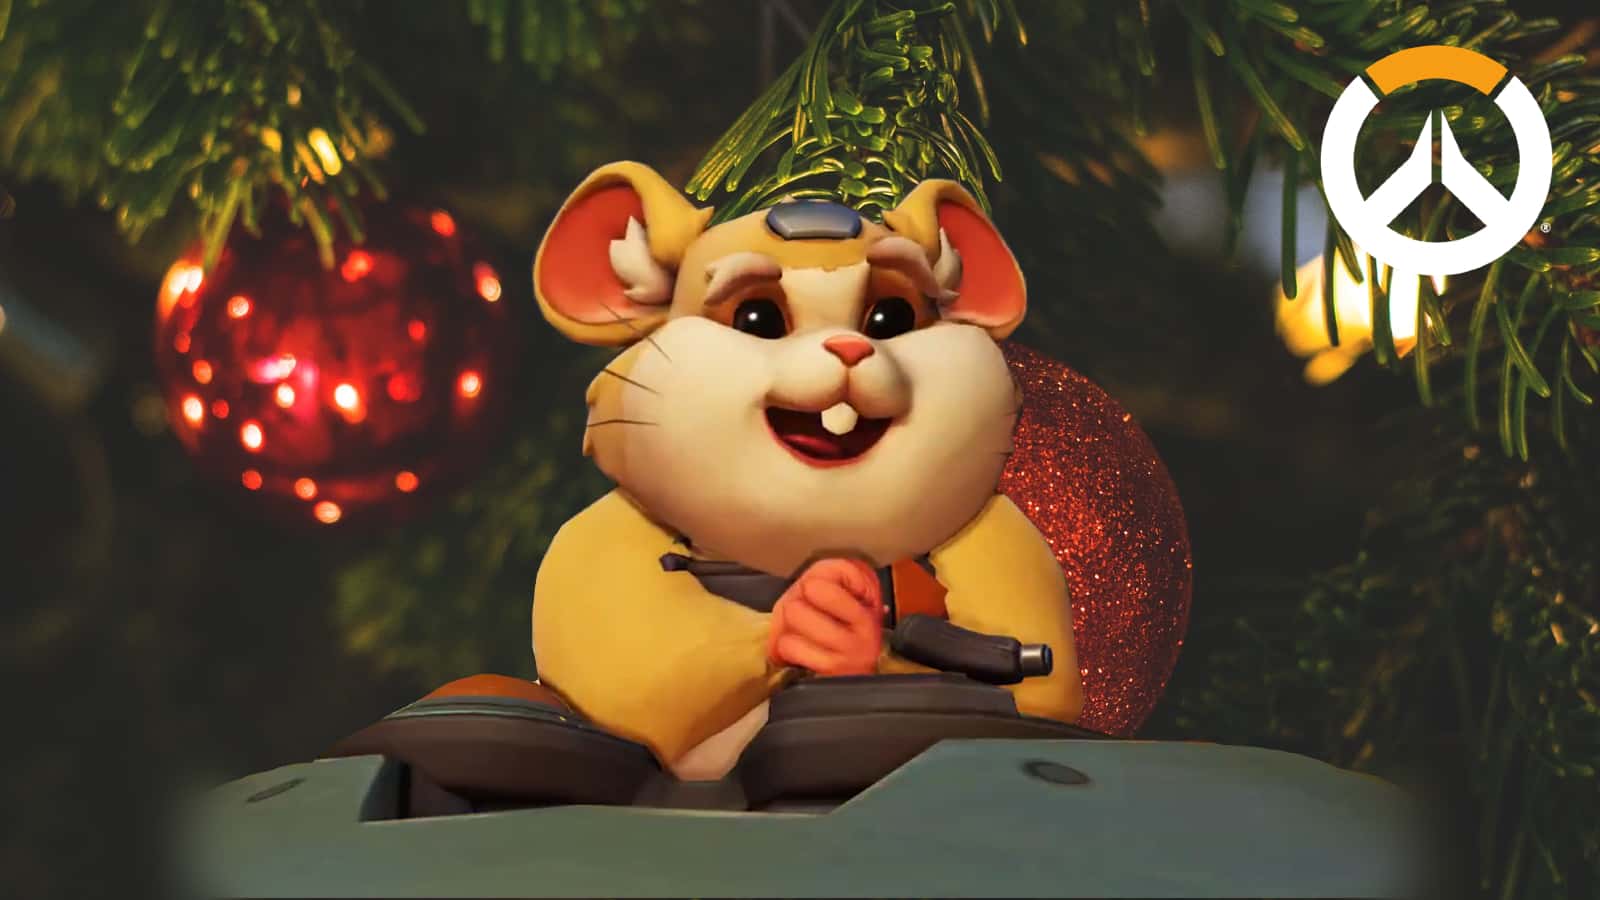 overwatch wrecking ball hammond against a christmas background with tree and decorations